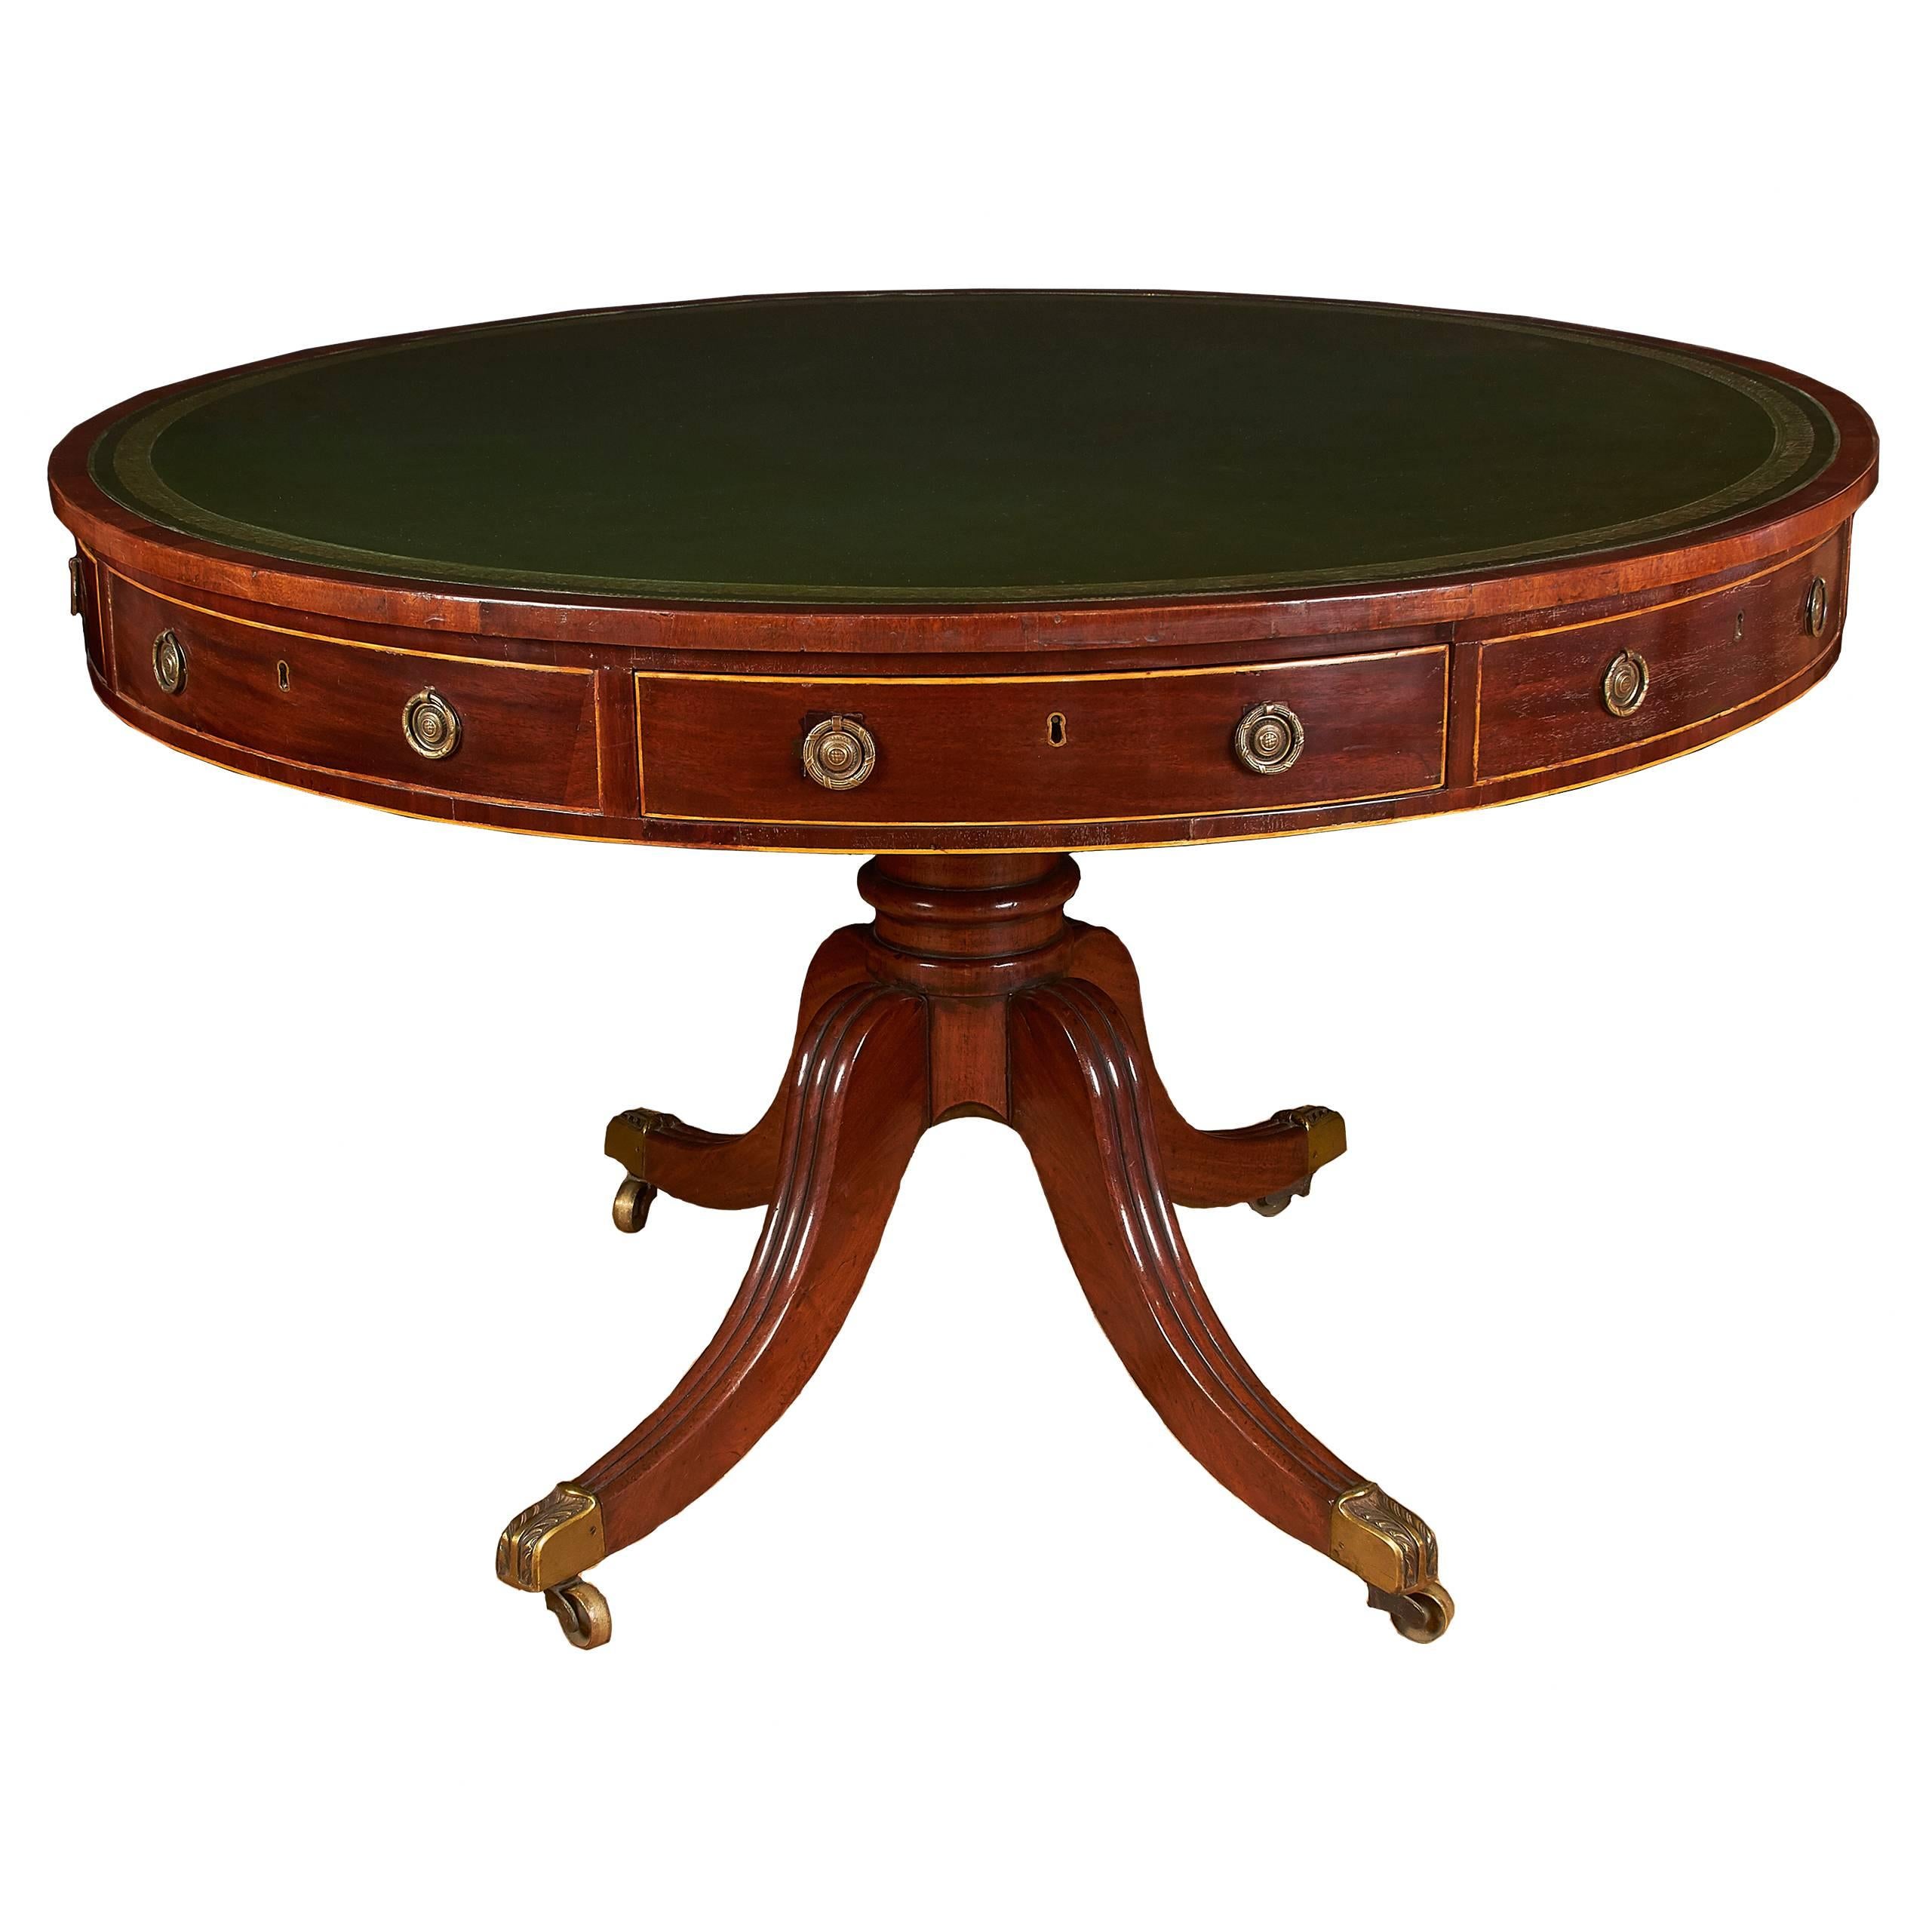 Regency Mahogany Drum Table with Four Drawers